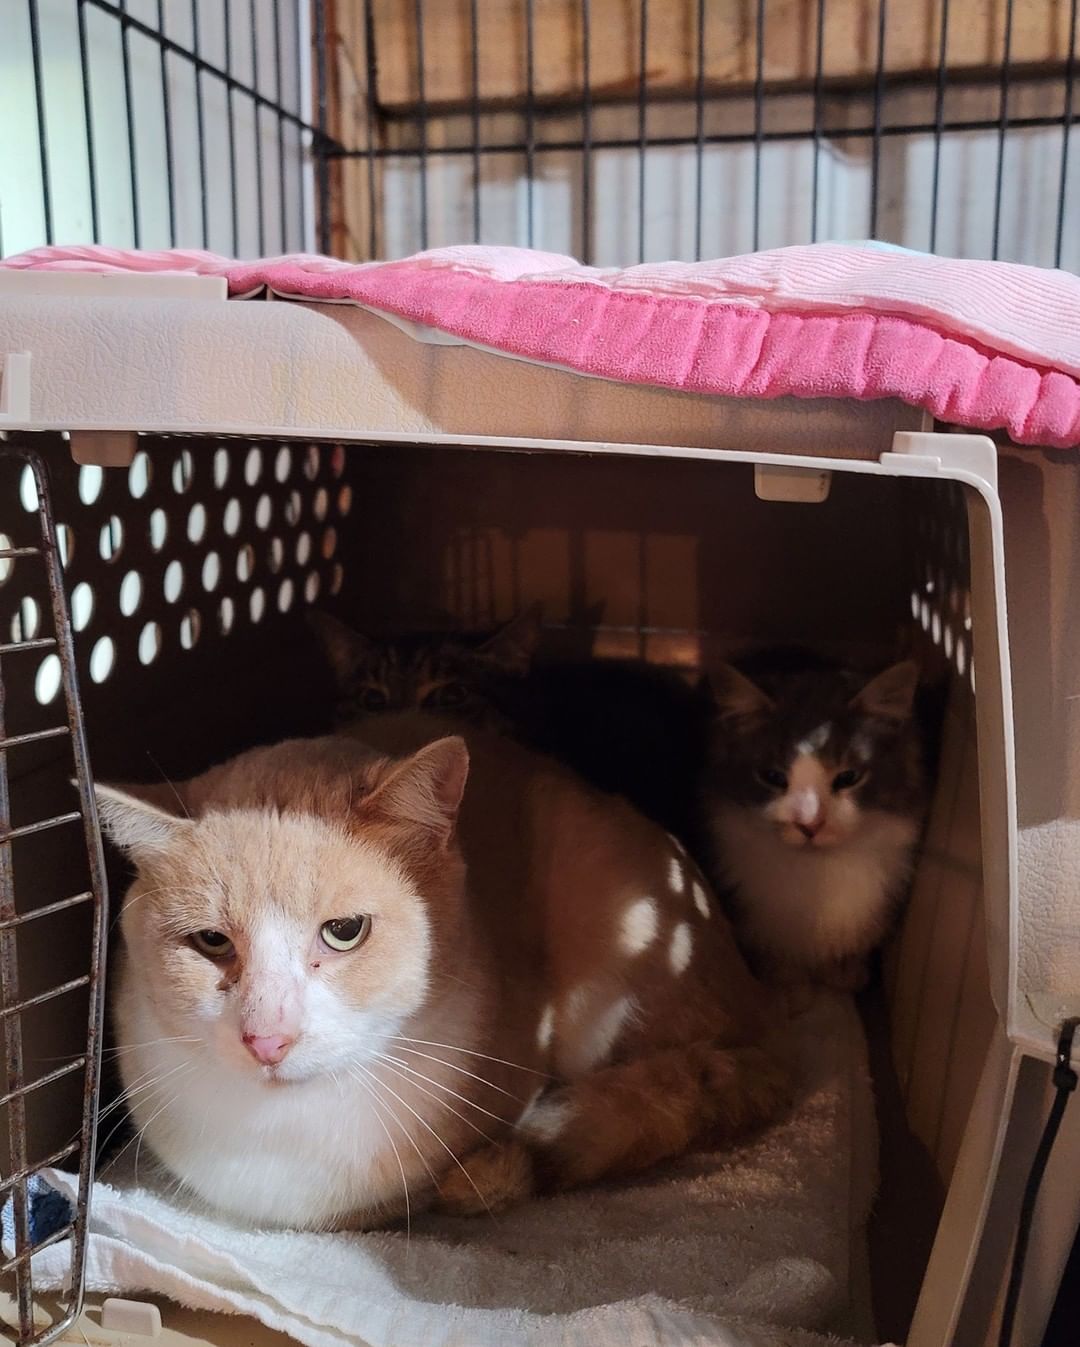 The first group of ten went up to Seattle Humane and we are greatful for their help!!! The next 7 so far were captured yesterday and today, including the one eyed siamese! They are currently being held here at the sanctuary and will also move up north next week. 

Thank you @seattlehumane  for giving us a hand with this large site!

So far all the cats are just the sweetest! Mellow and friendly!!! They will make amazing pets !